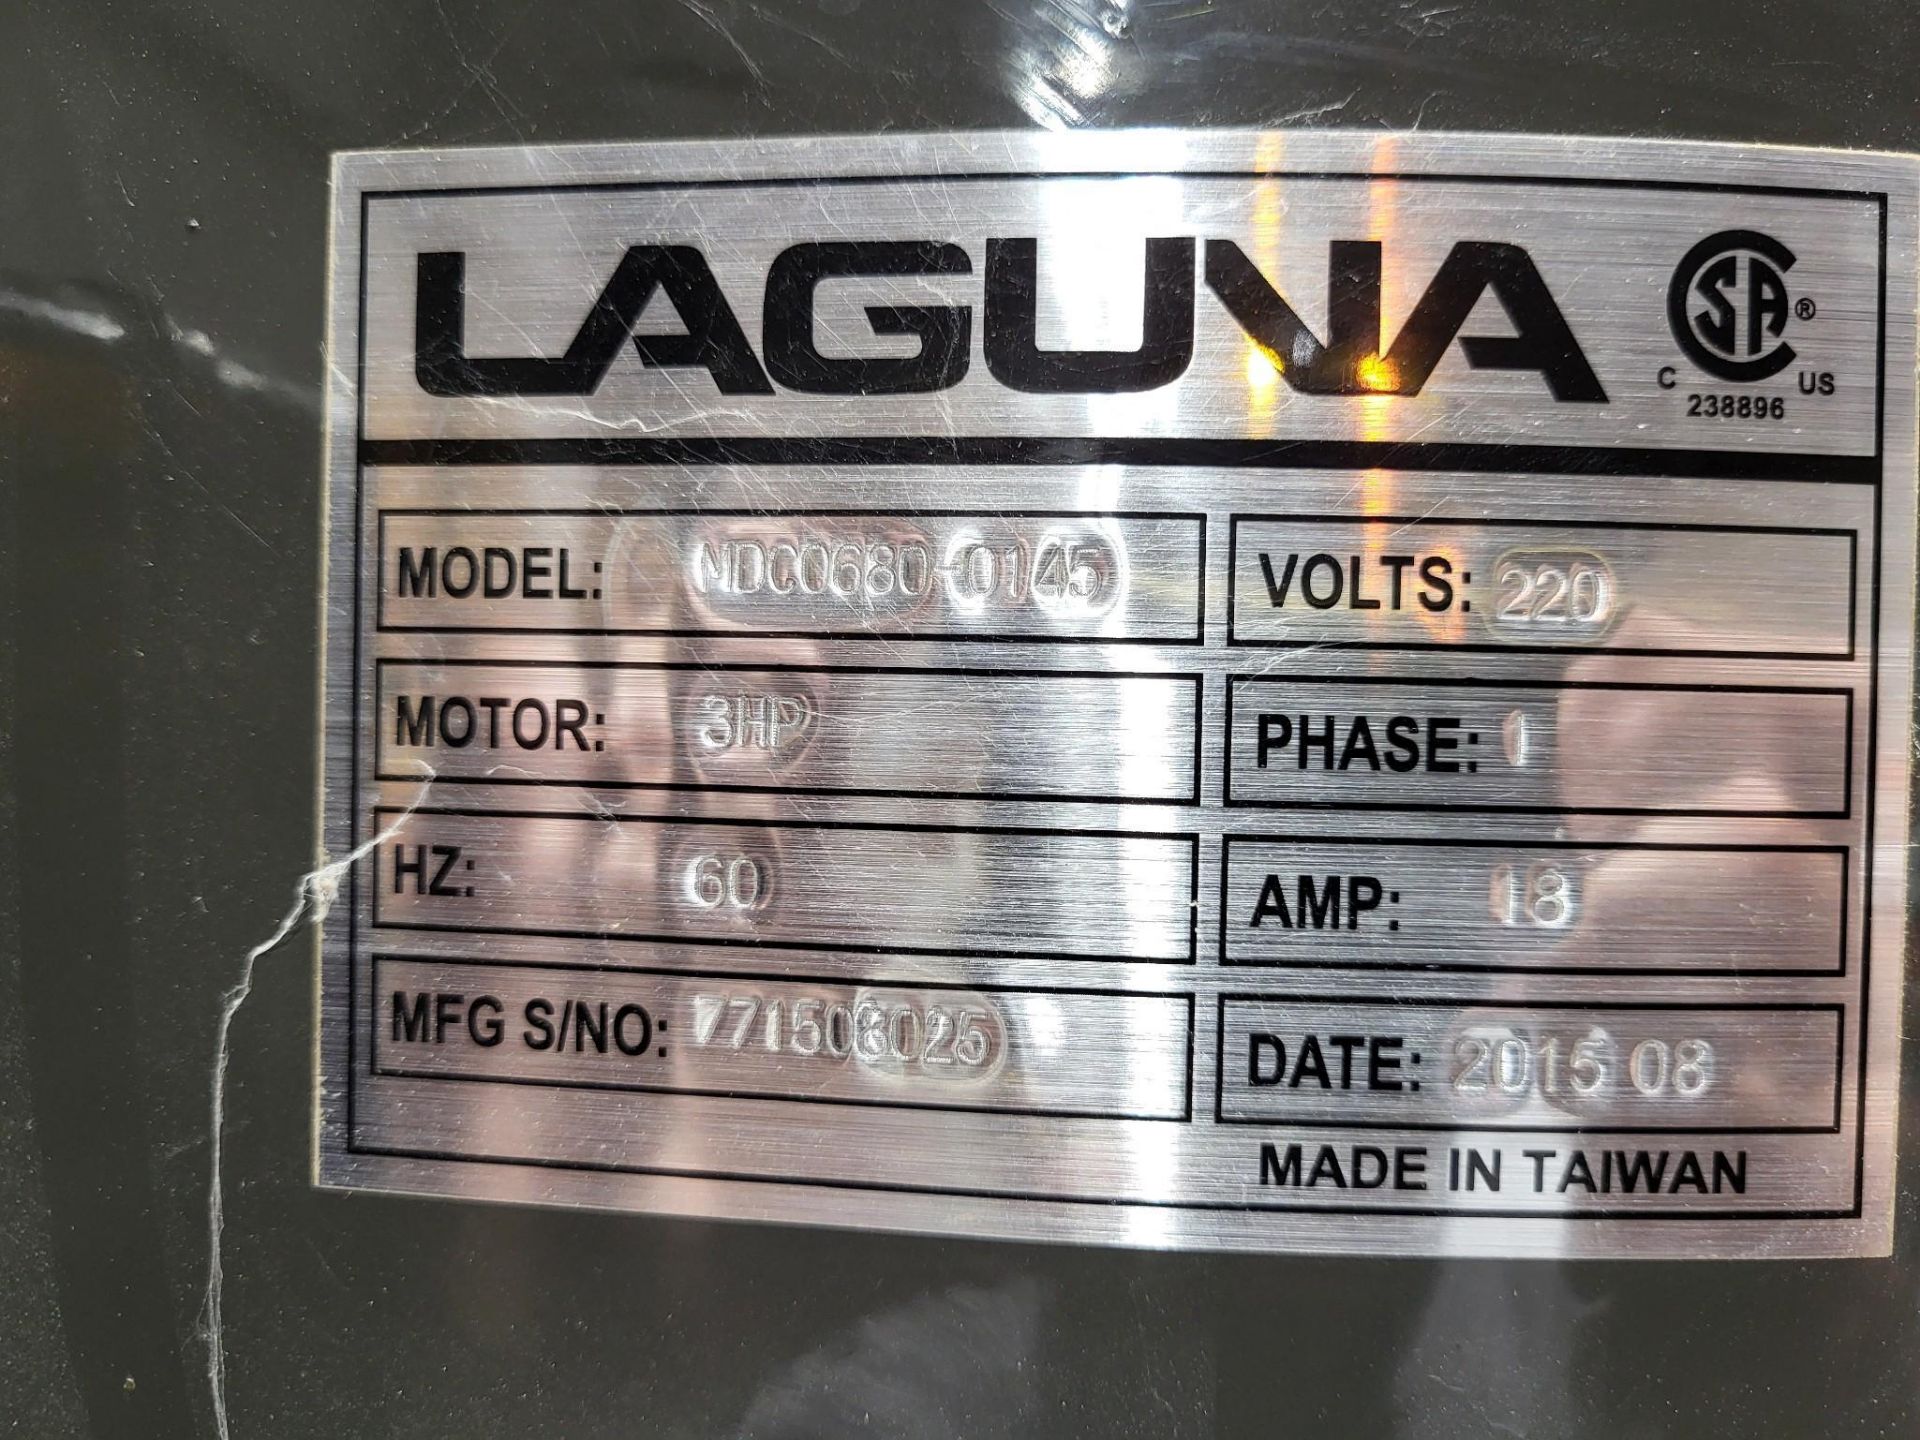 2015 LAGUNA MDC0680-0145 3HP DUST COLLECTOR - Image 7 of 7